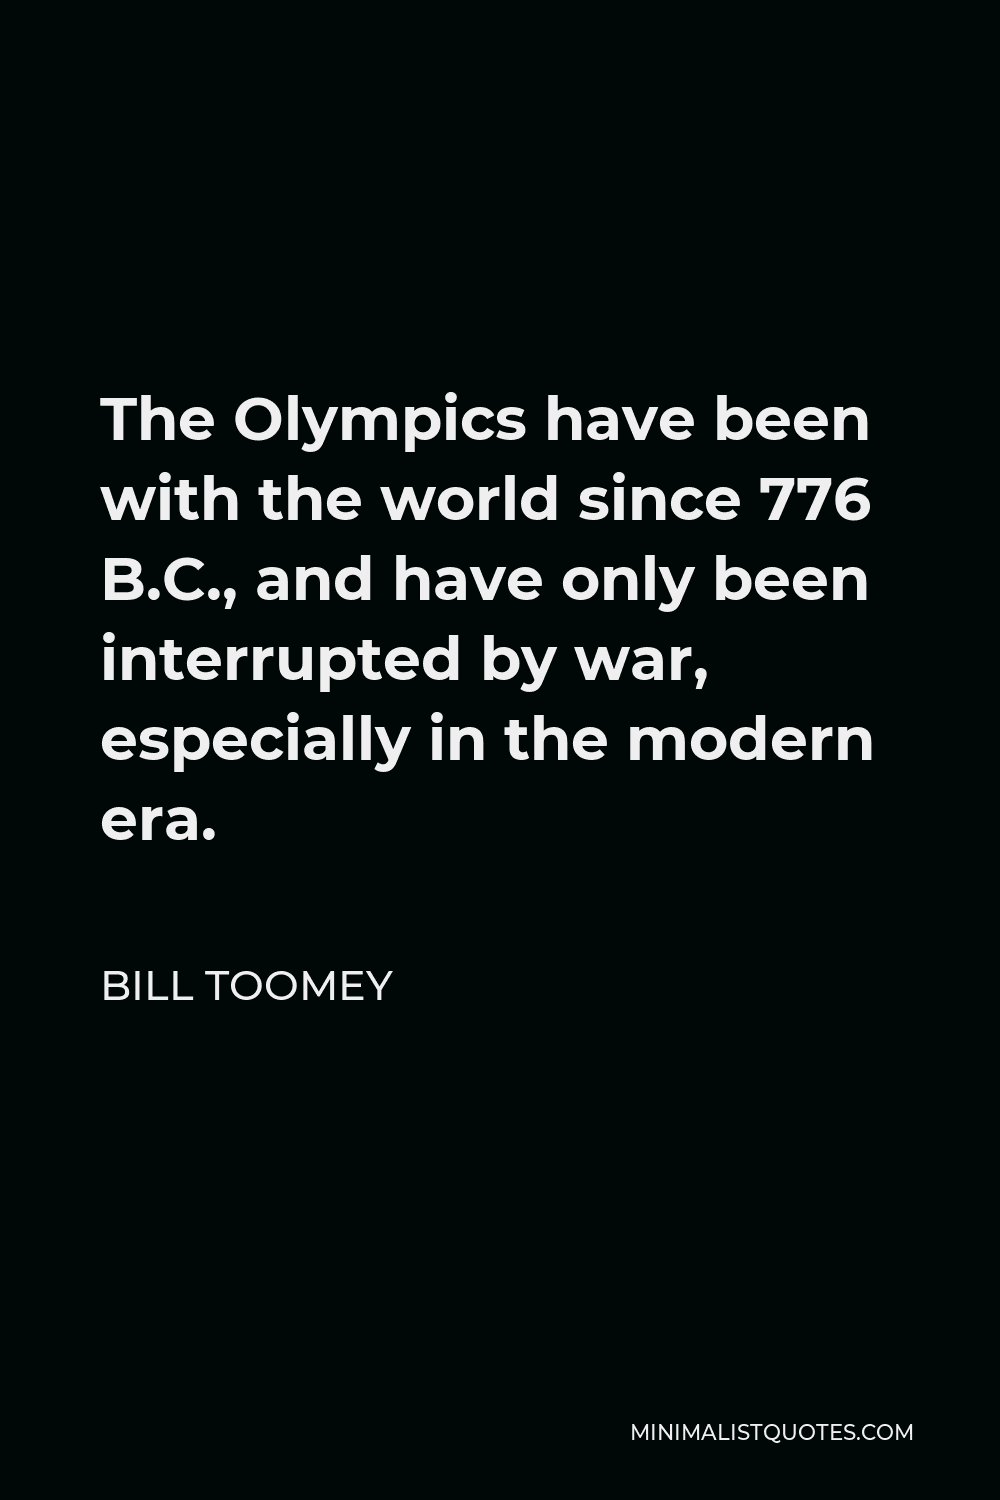 Bill Toomey Quote - The Olympics have been with the world since 776 B.C., and have only been interrupted by war, especially in the modern era.